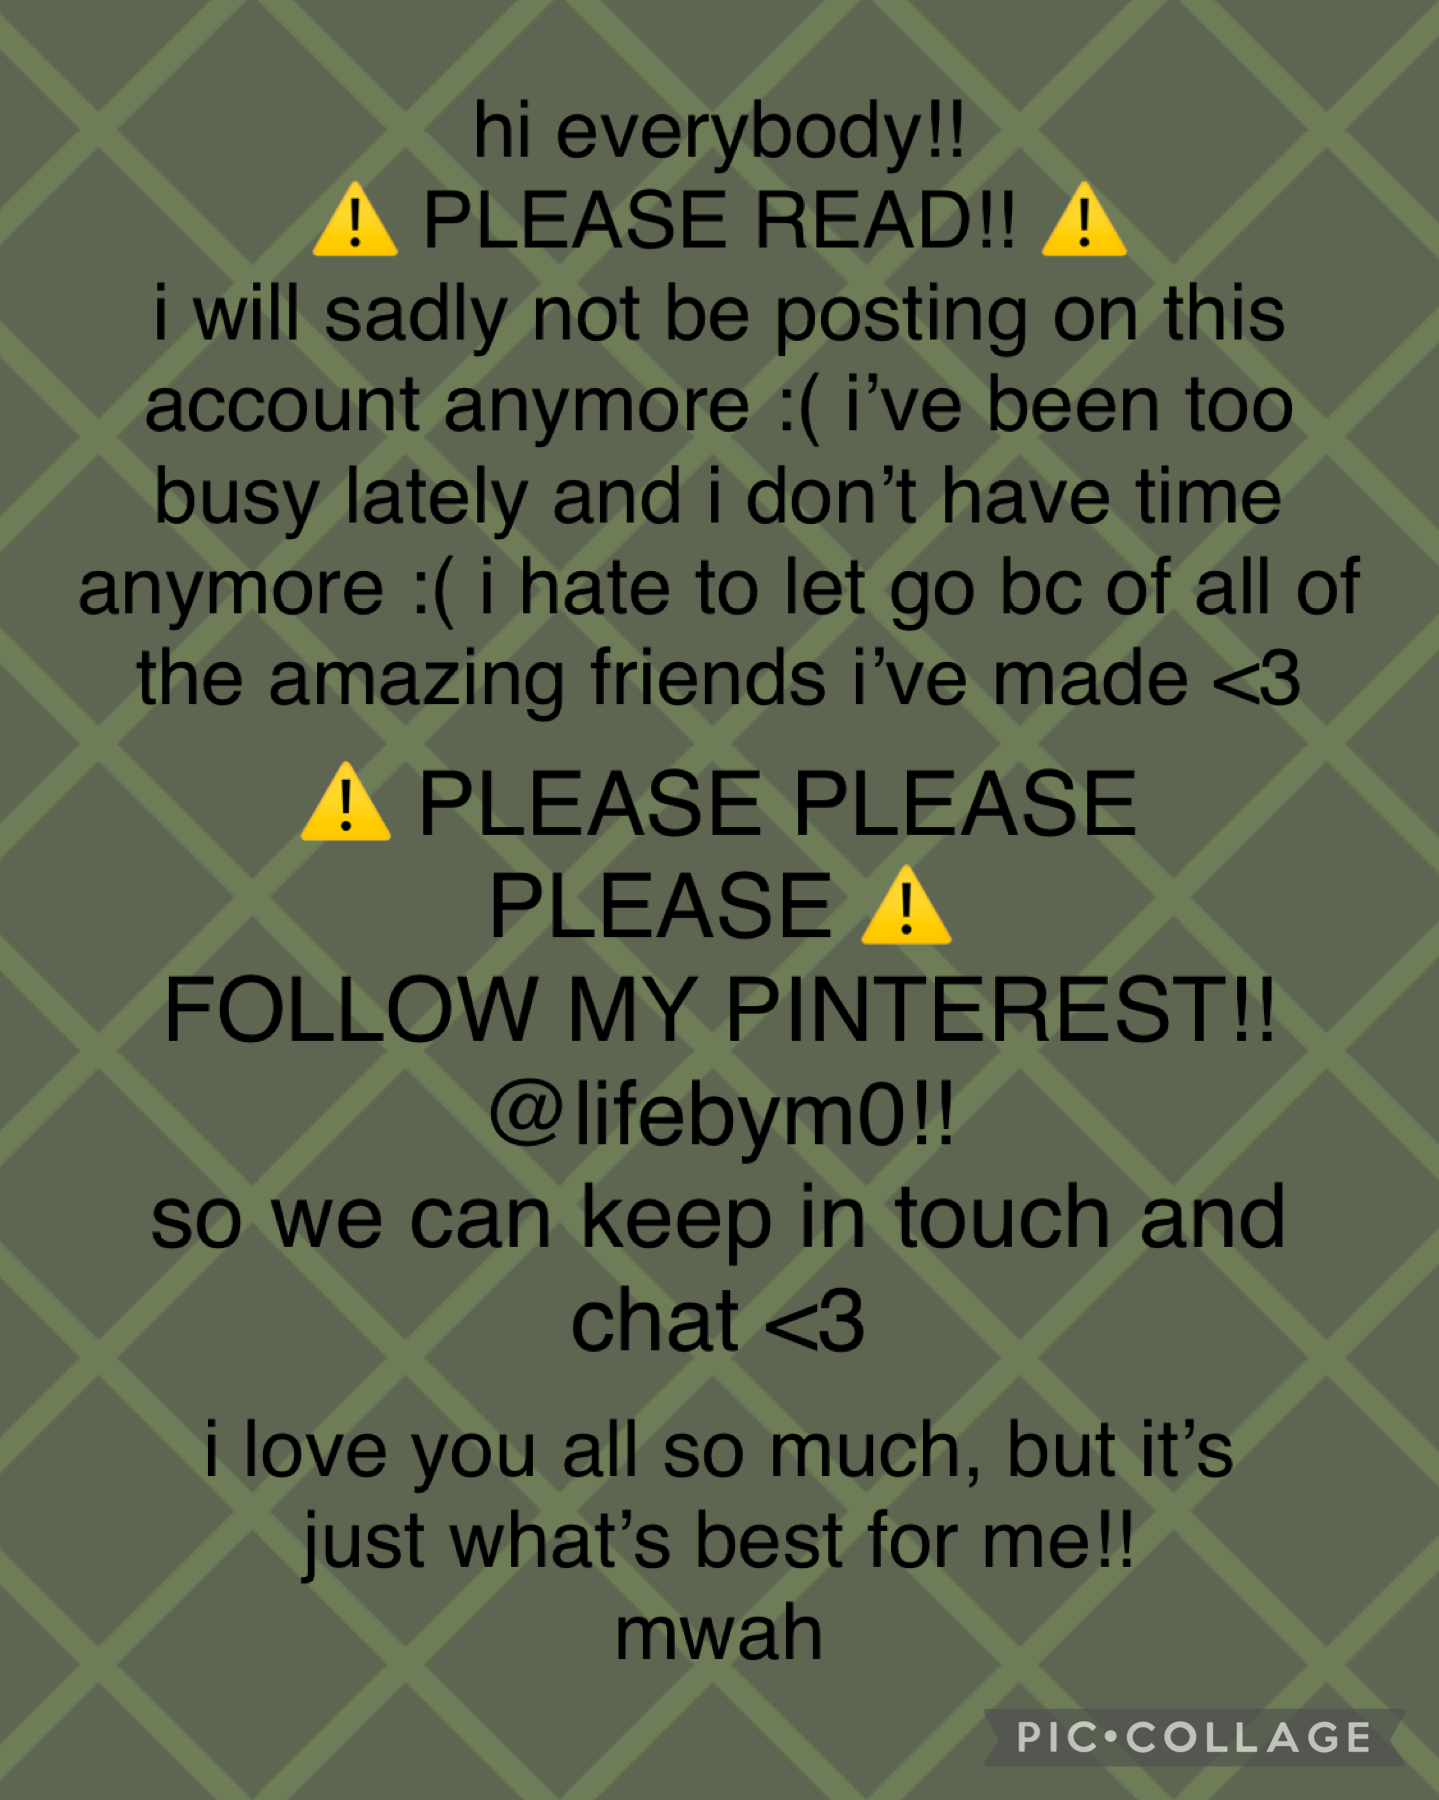 pls read <3 (tap) 
also feel free to drop your pinterest in the comments if you’d rather me find you :) 
ily all :’) 
